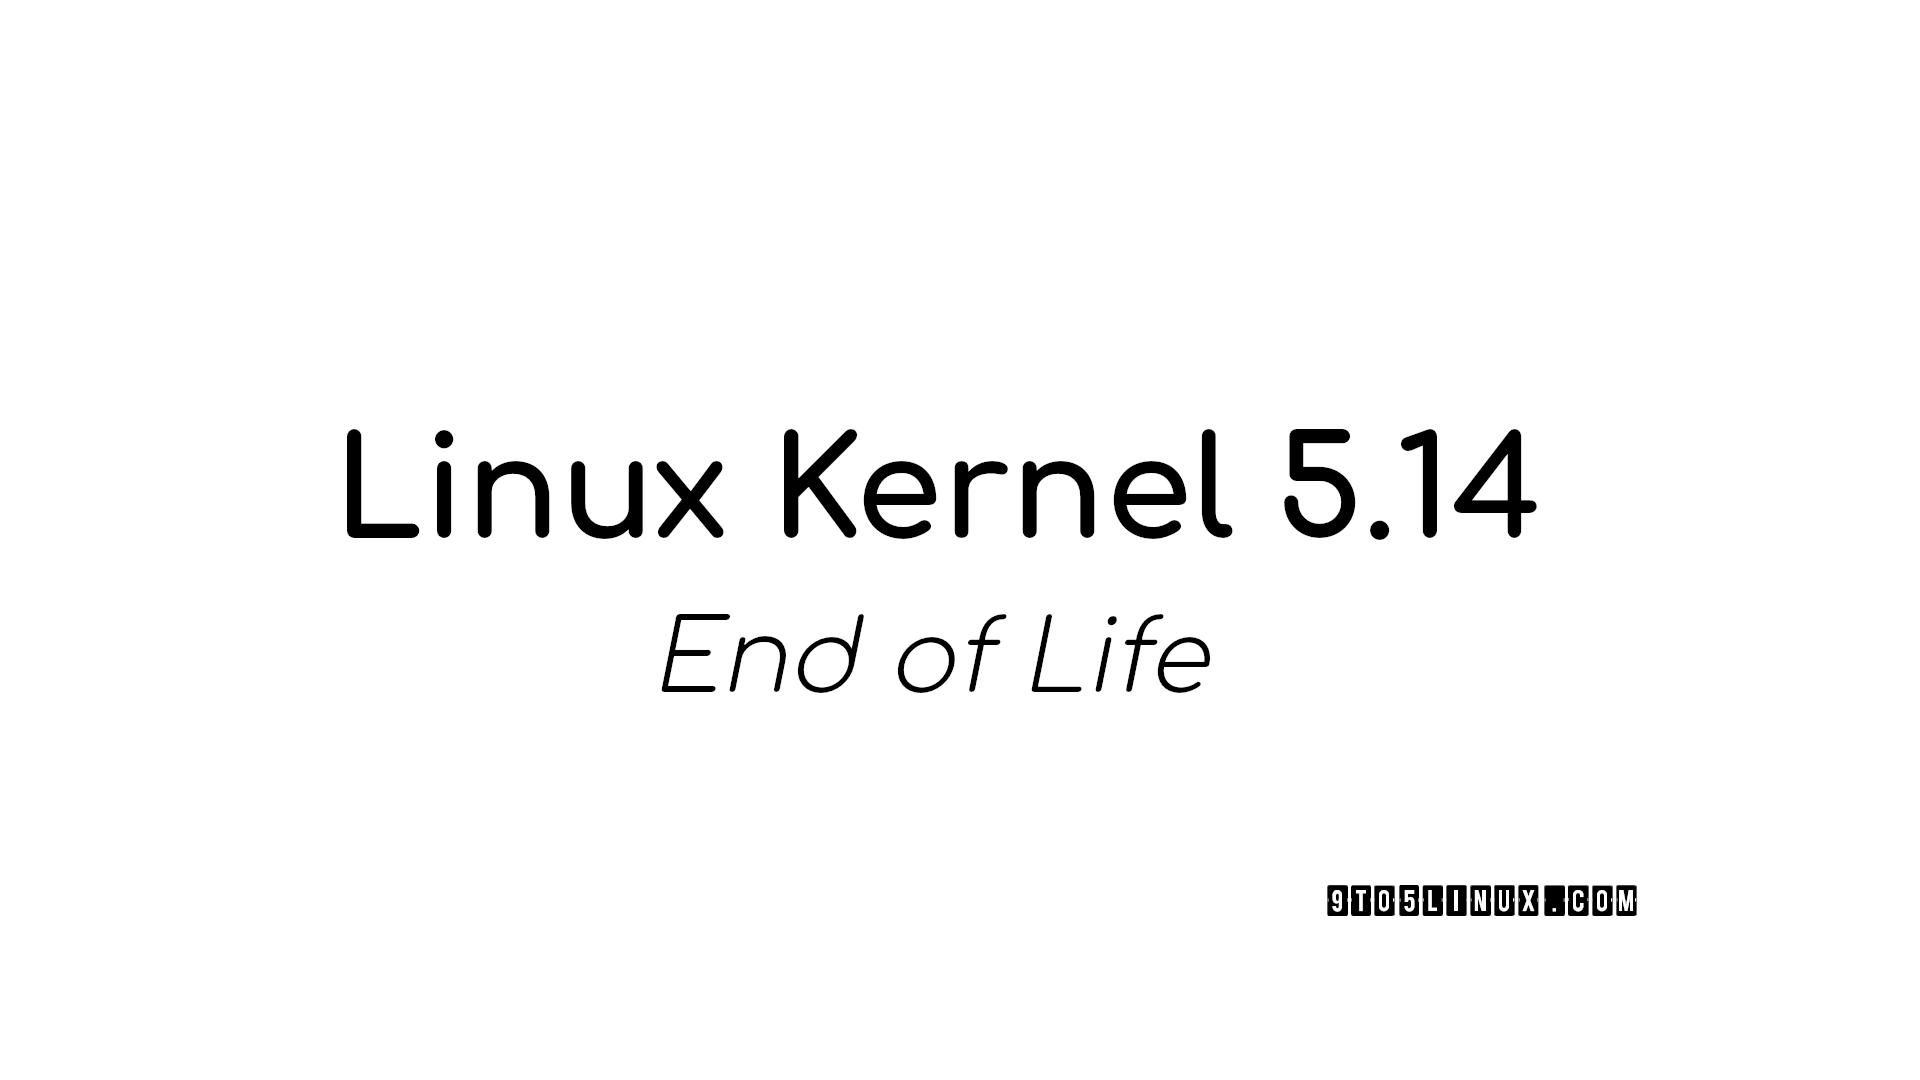 Linux Kernel 5.14 Reached End of Life, Users Urged to Upgrade to Linux 5.15 LTS